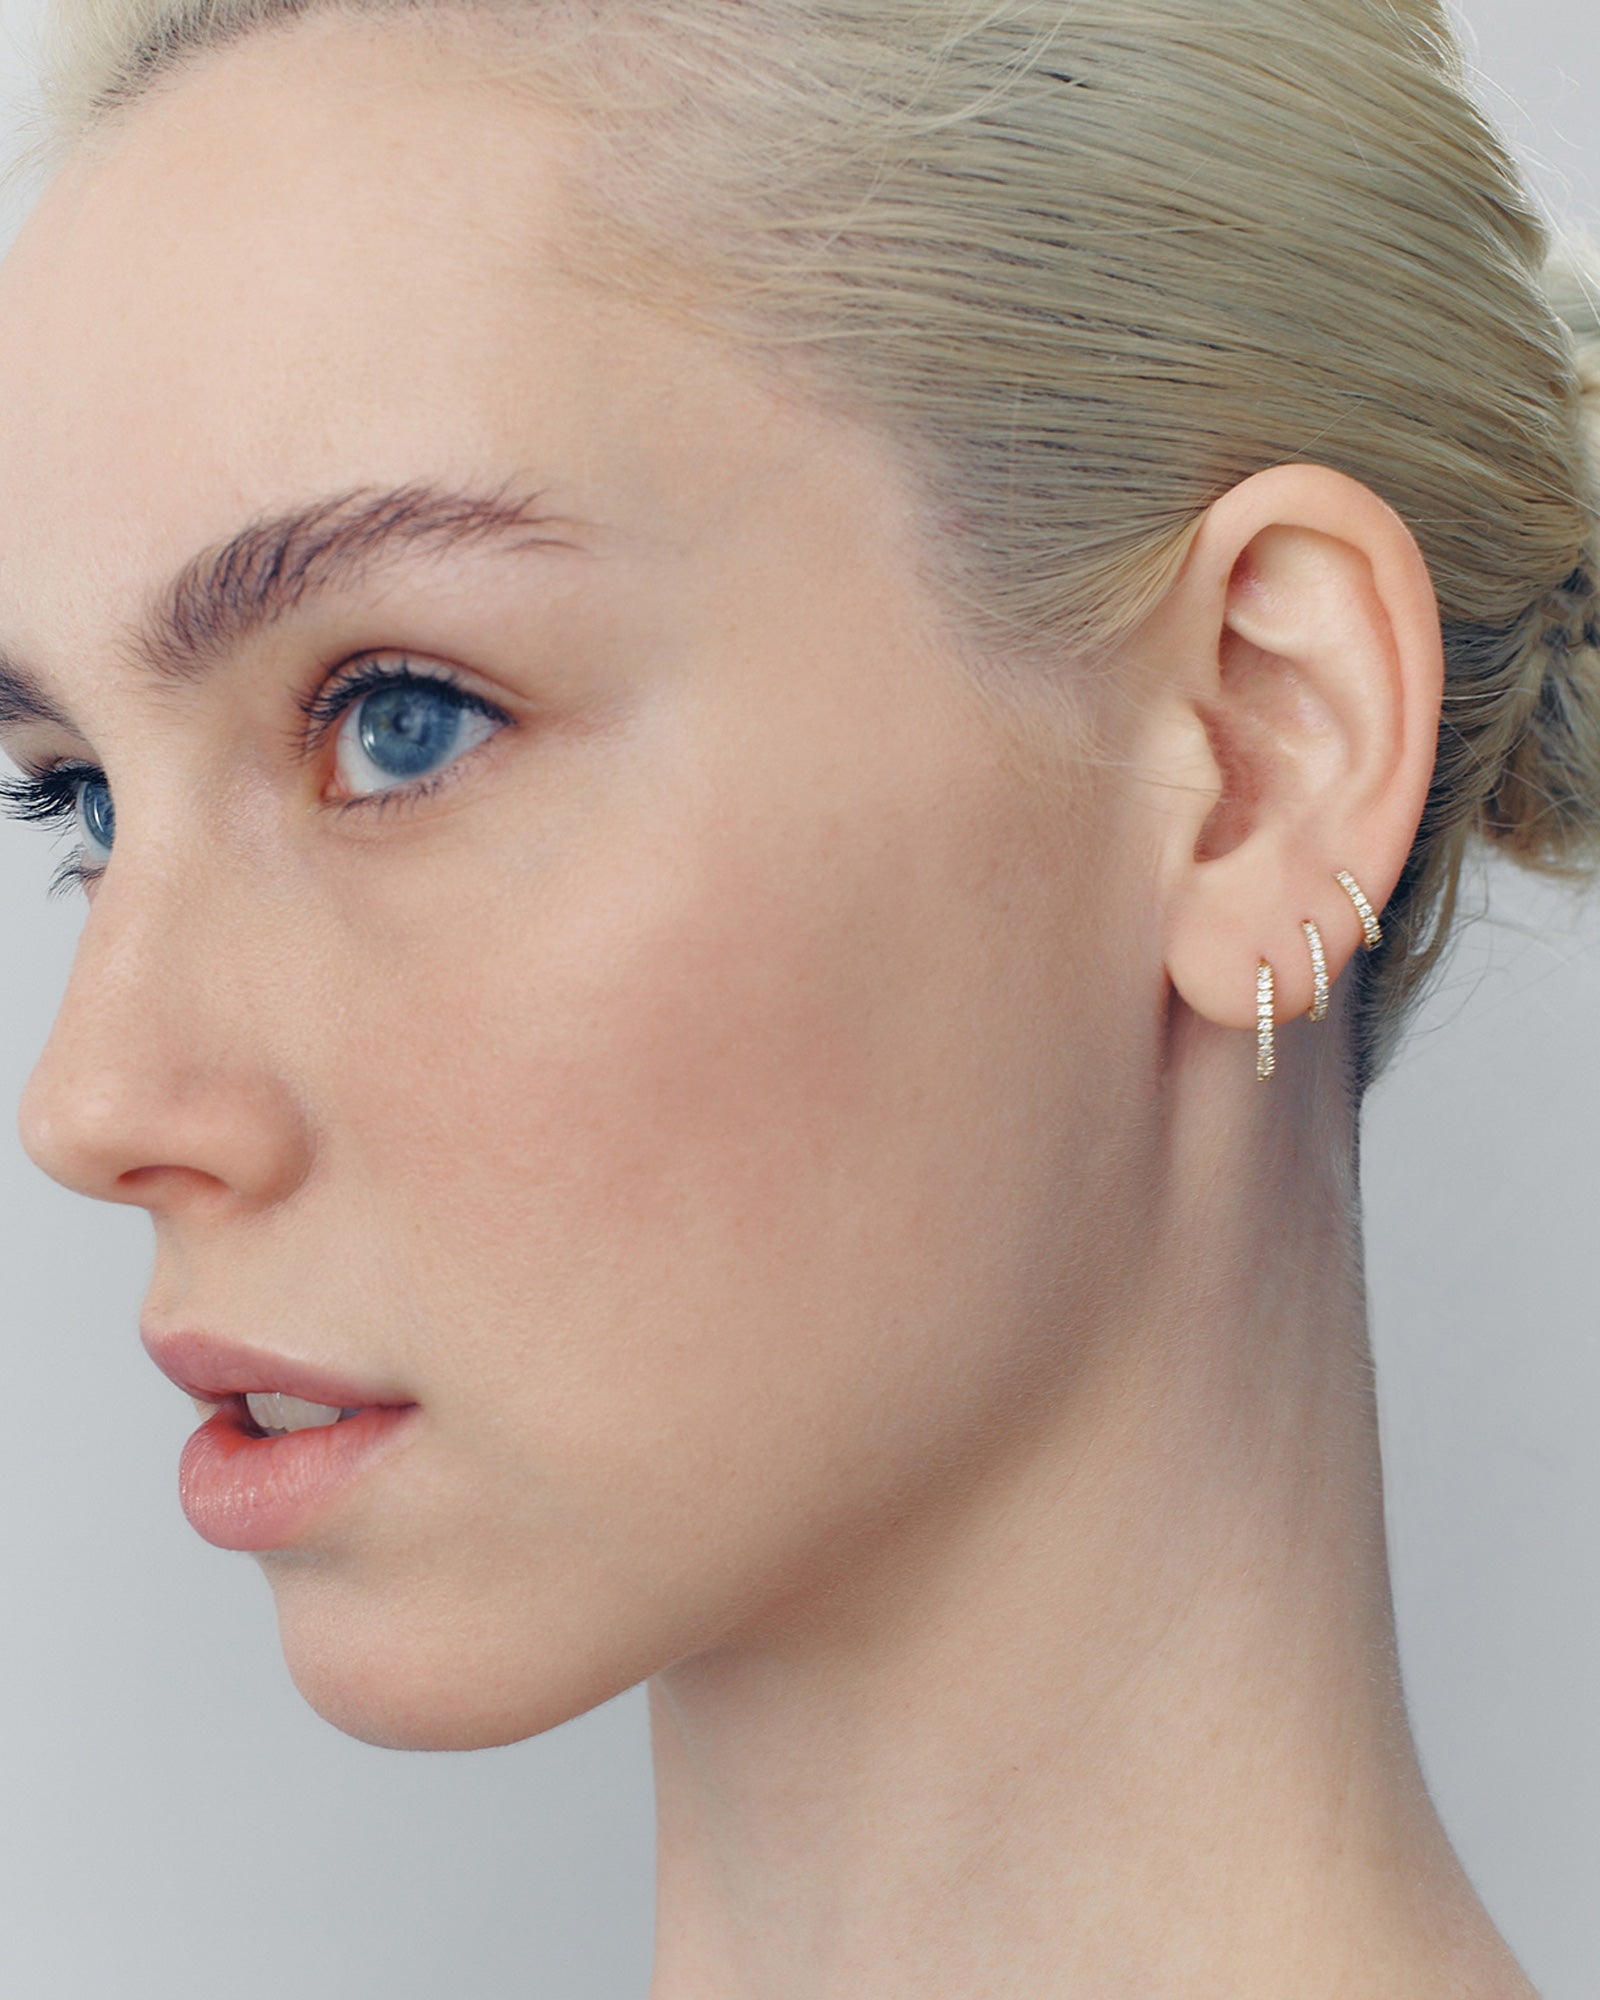 Billy Earrings - White Diamonds - Available In Three Sizes